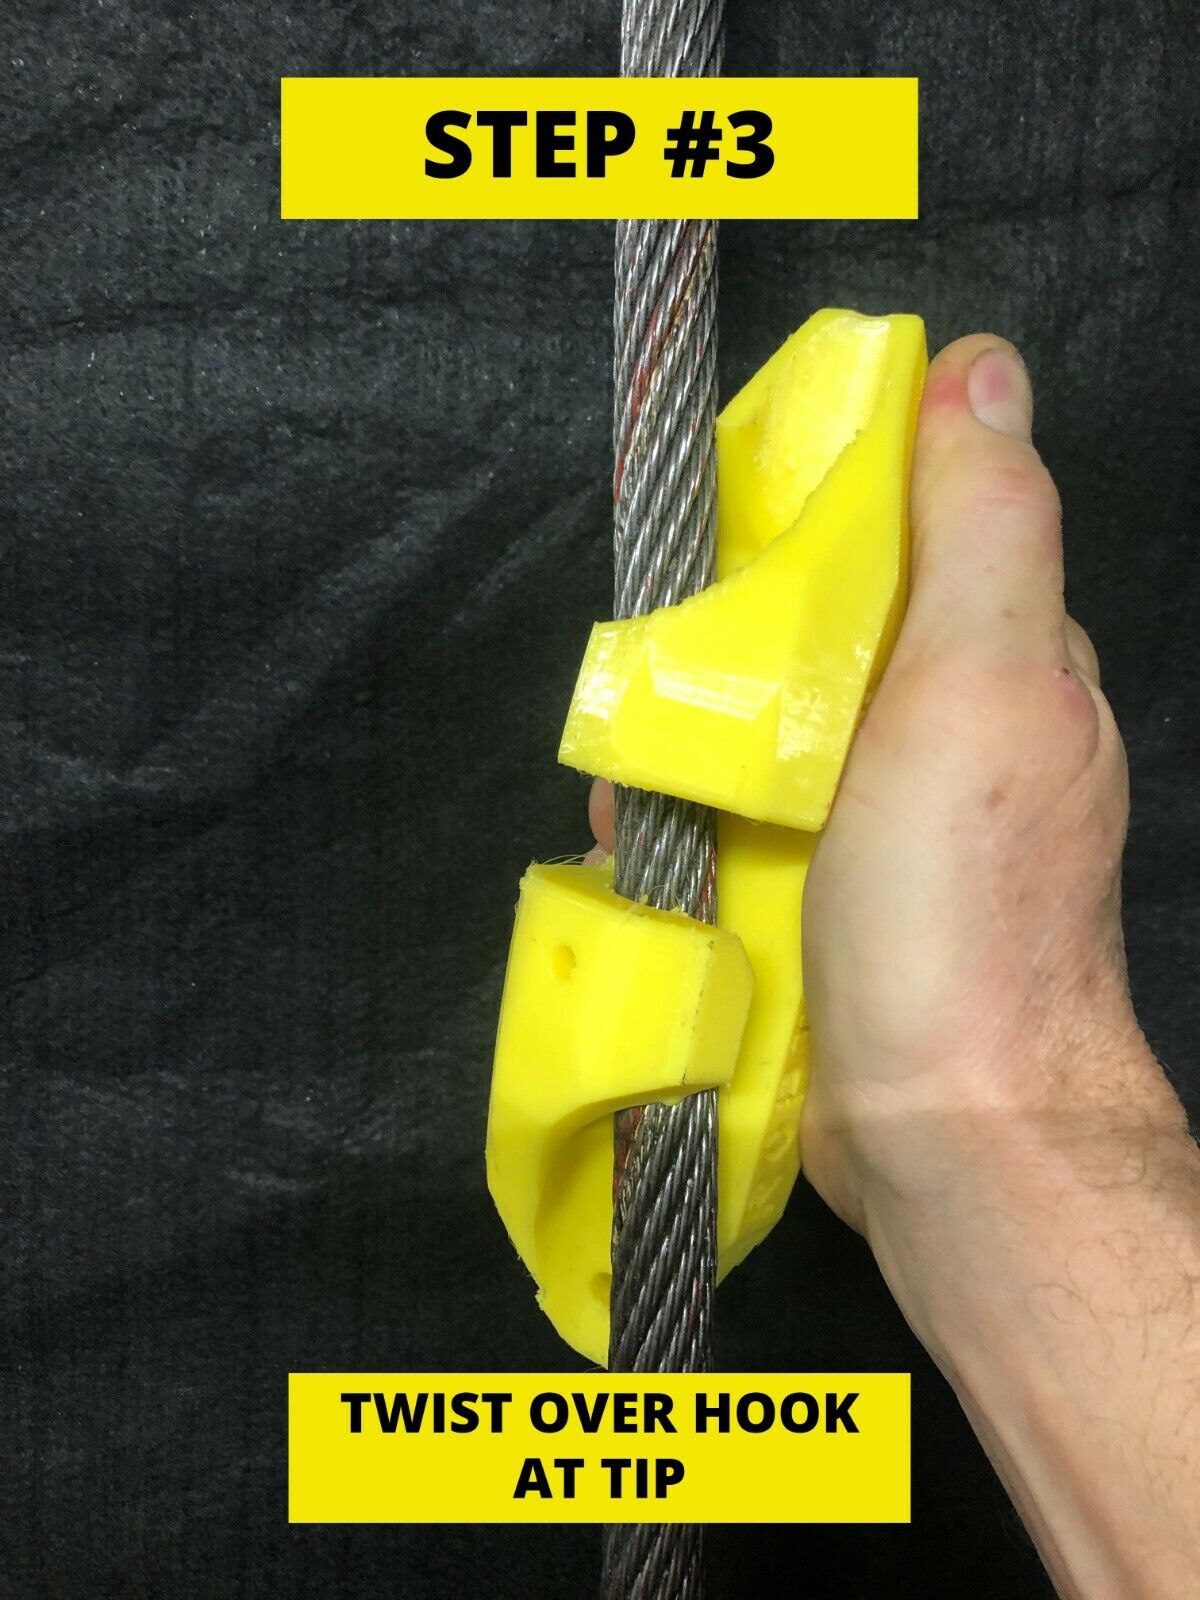 Ropinator Yellow for 3/4 wire rope for cranes